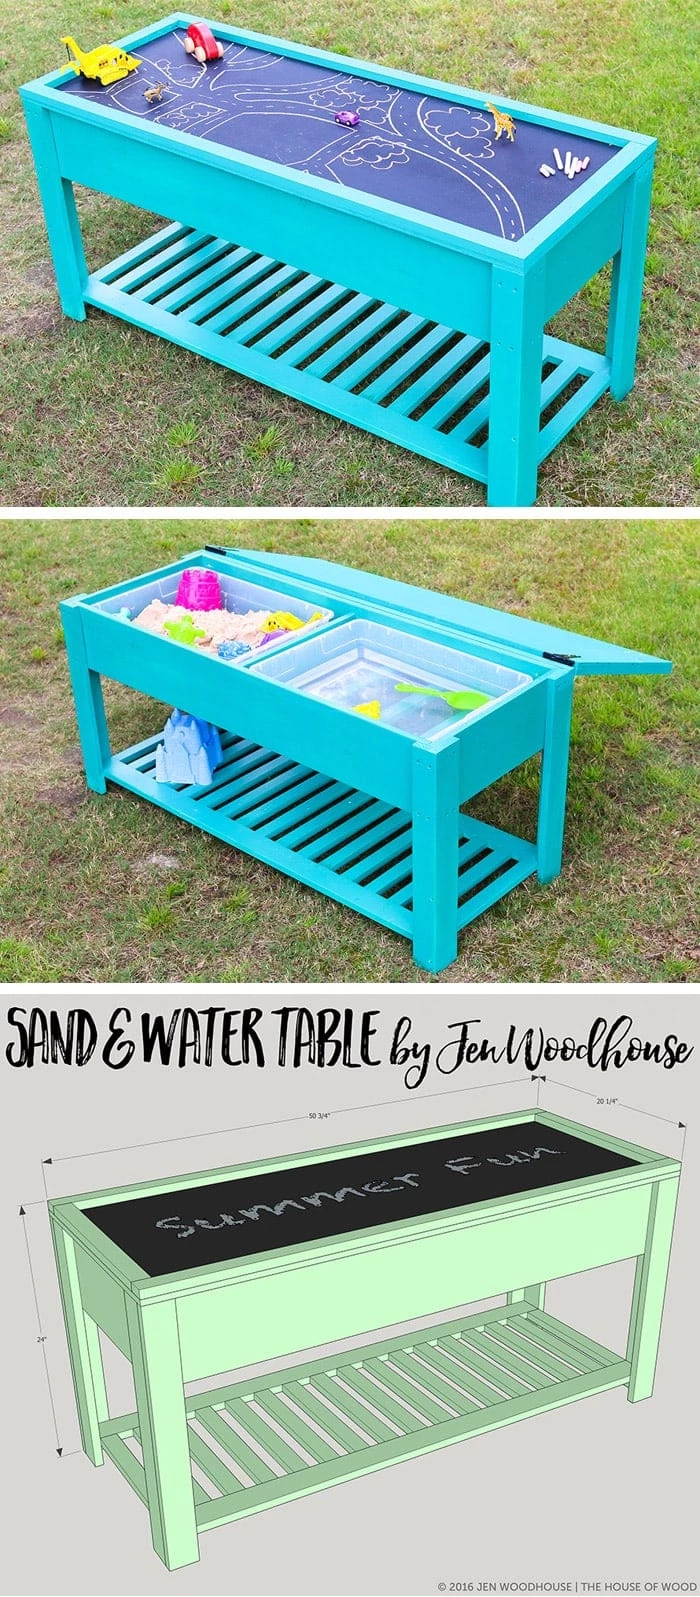 Backyard Activities For Kids - Sand and Water Table